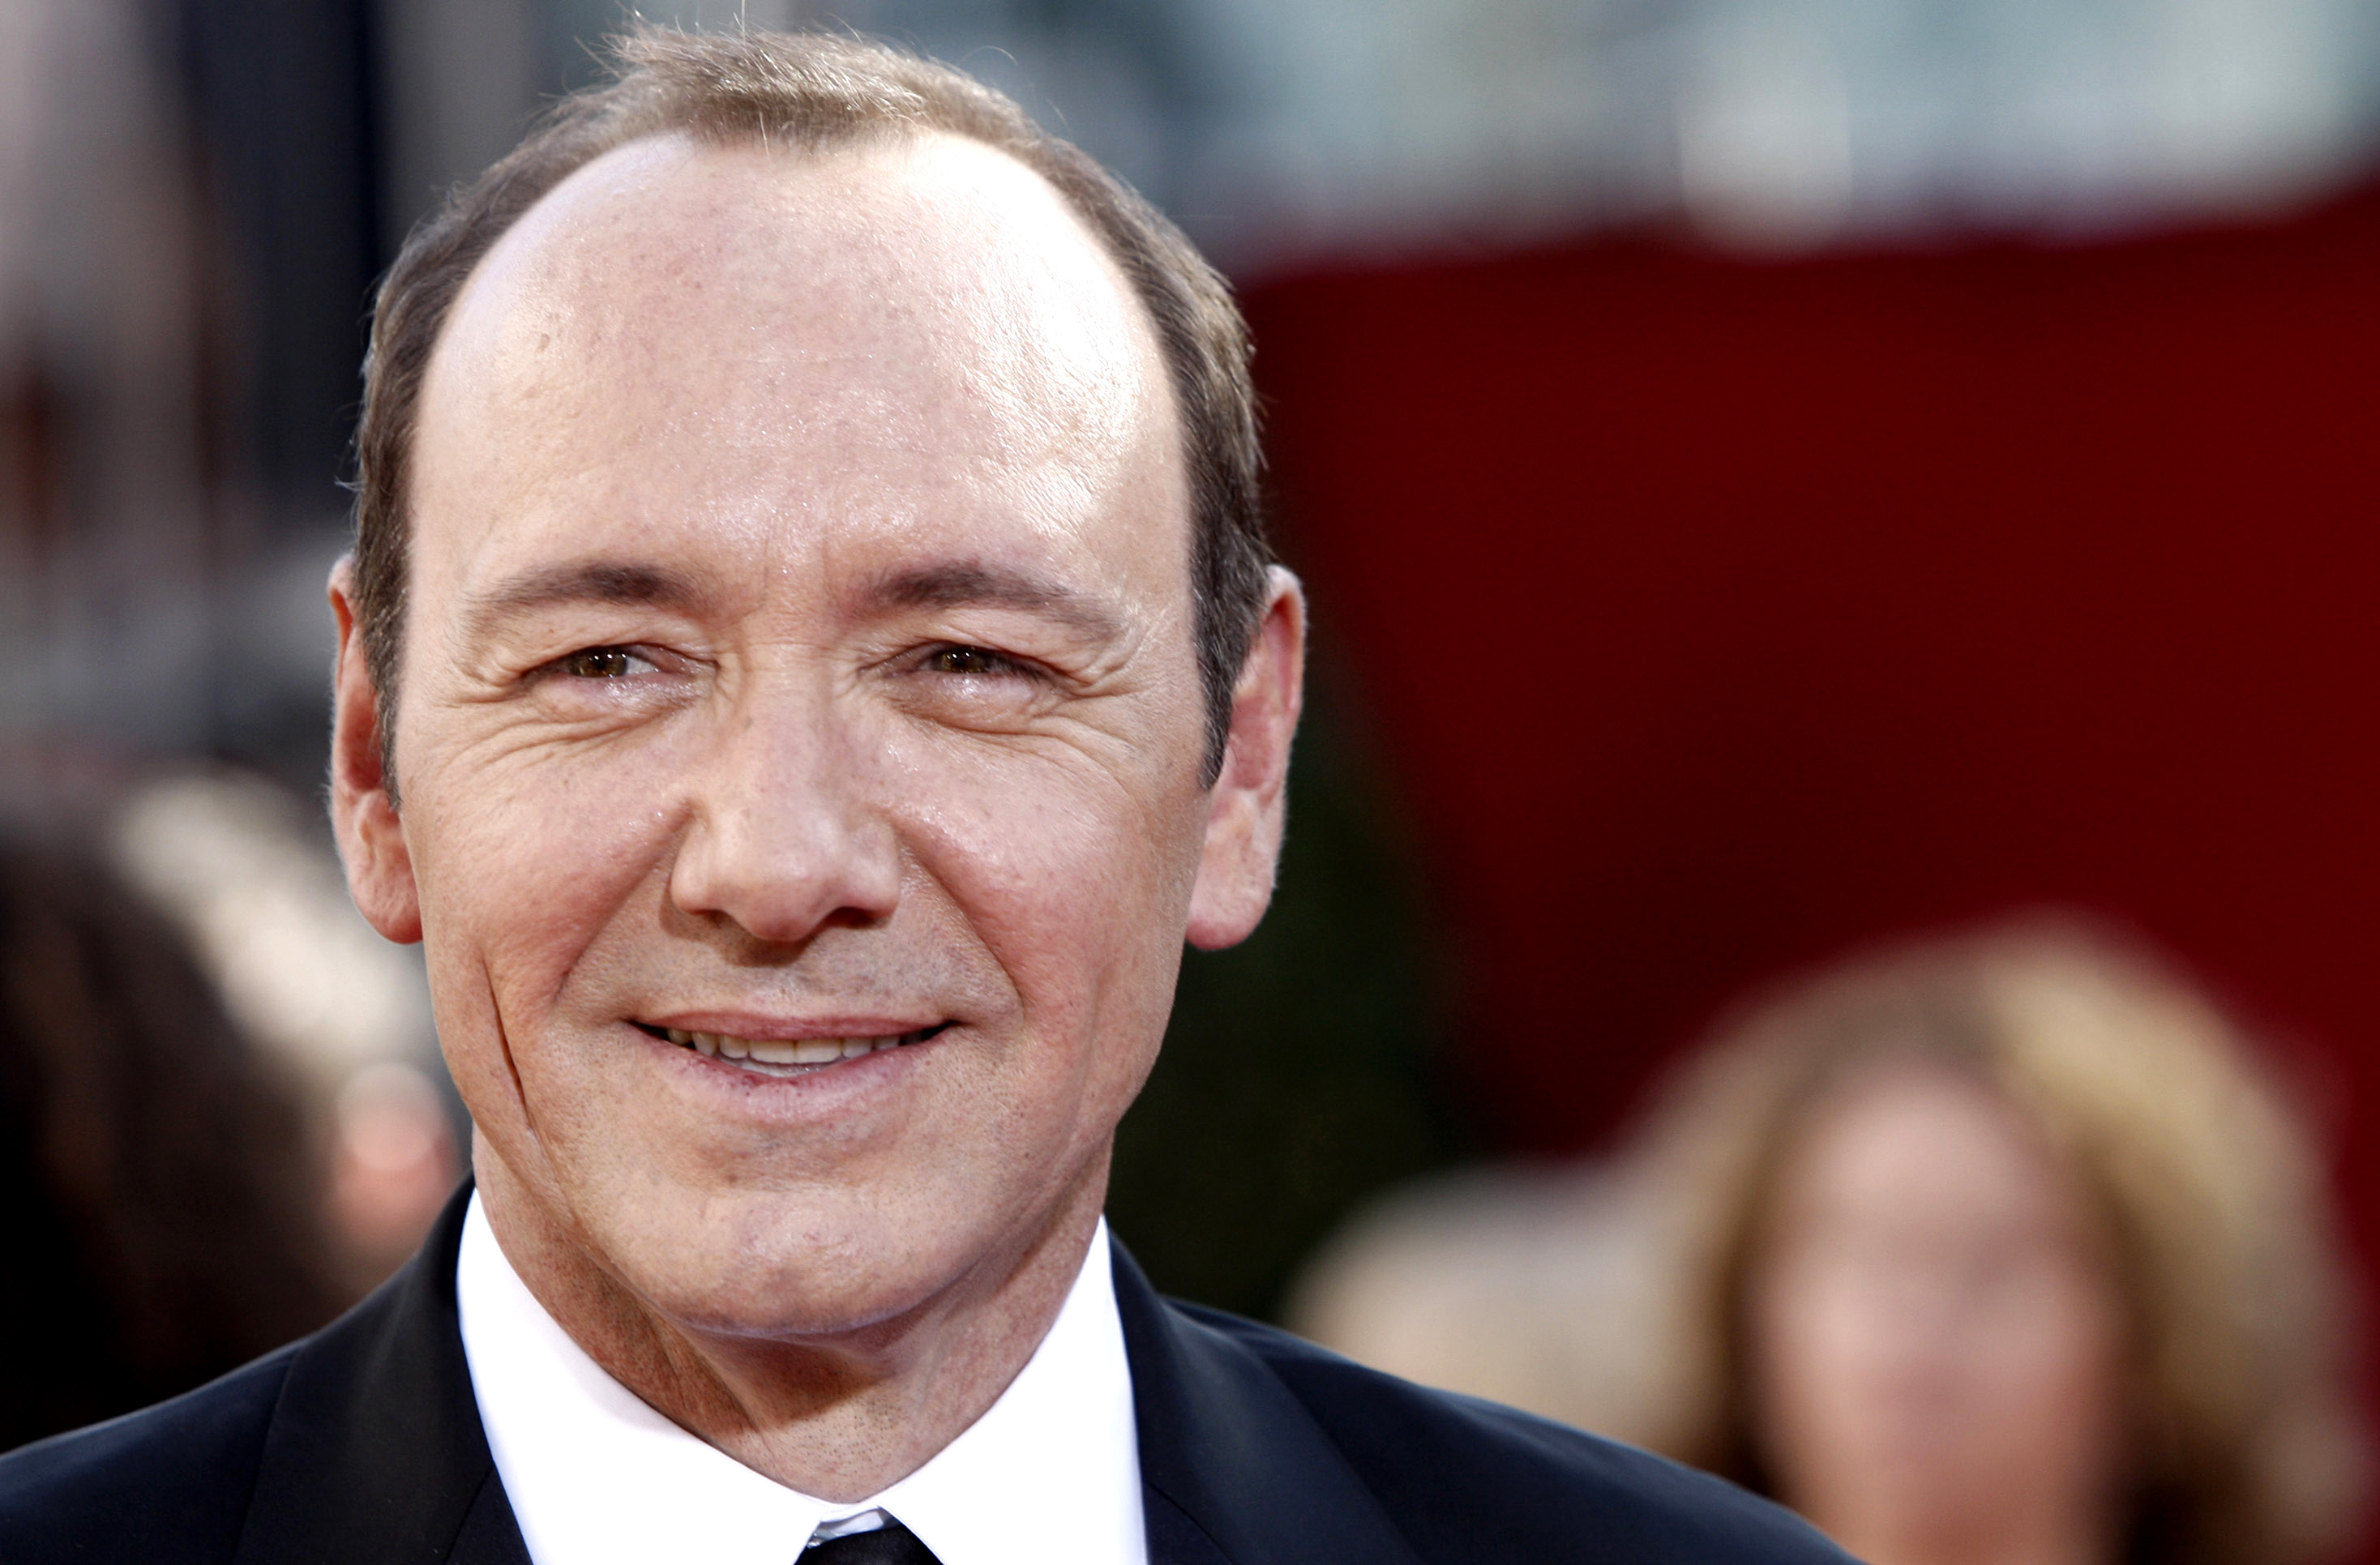 In this Sept. 21, 2008 file photo, actor Kevin Spacey arrives at the 60th Primetime Emmy Awards in Los Angeles. A year after it became an unwilling focus for Britain's #MeToo movement, the Old Vic Theatre says it is trying to stamp out abuses of power in all workplaces.  The London theater company once led by actor Kevin Spacey said Monday, Oct. 1, 2018 that 20 cultural organizations have joined it in appointing workplace "guardians," specially trained staff who serve as a first line of defense against bullying, harassment and abuse. Image: AP/Matt Sayles